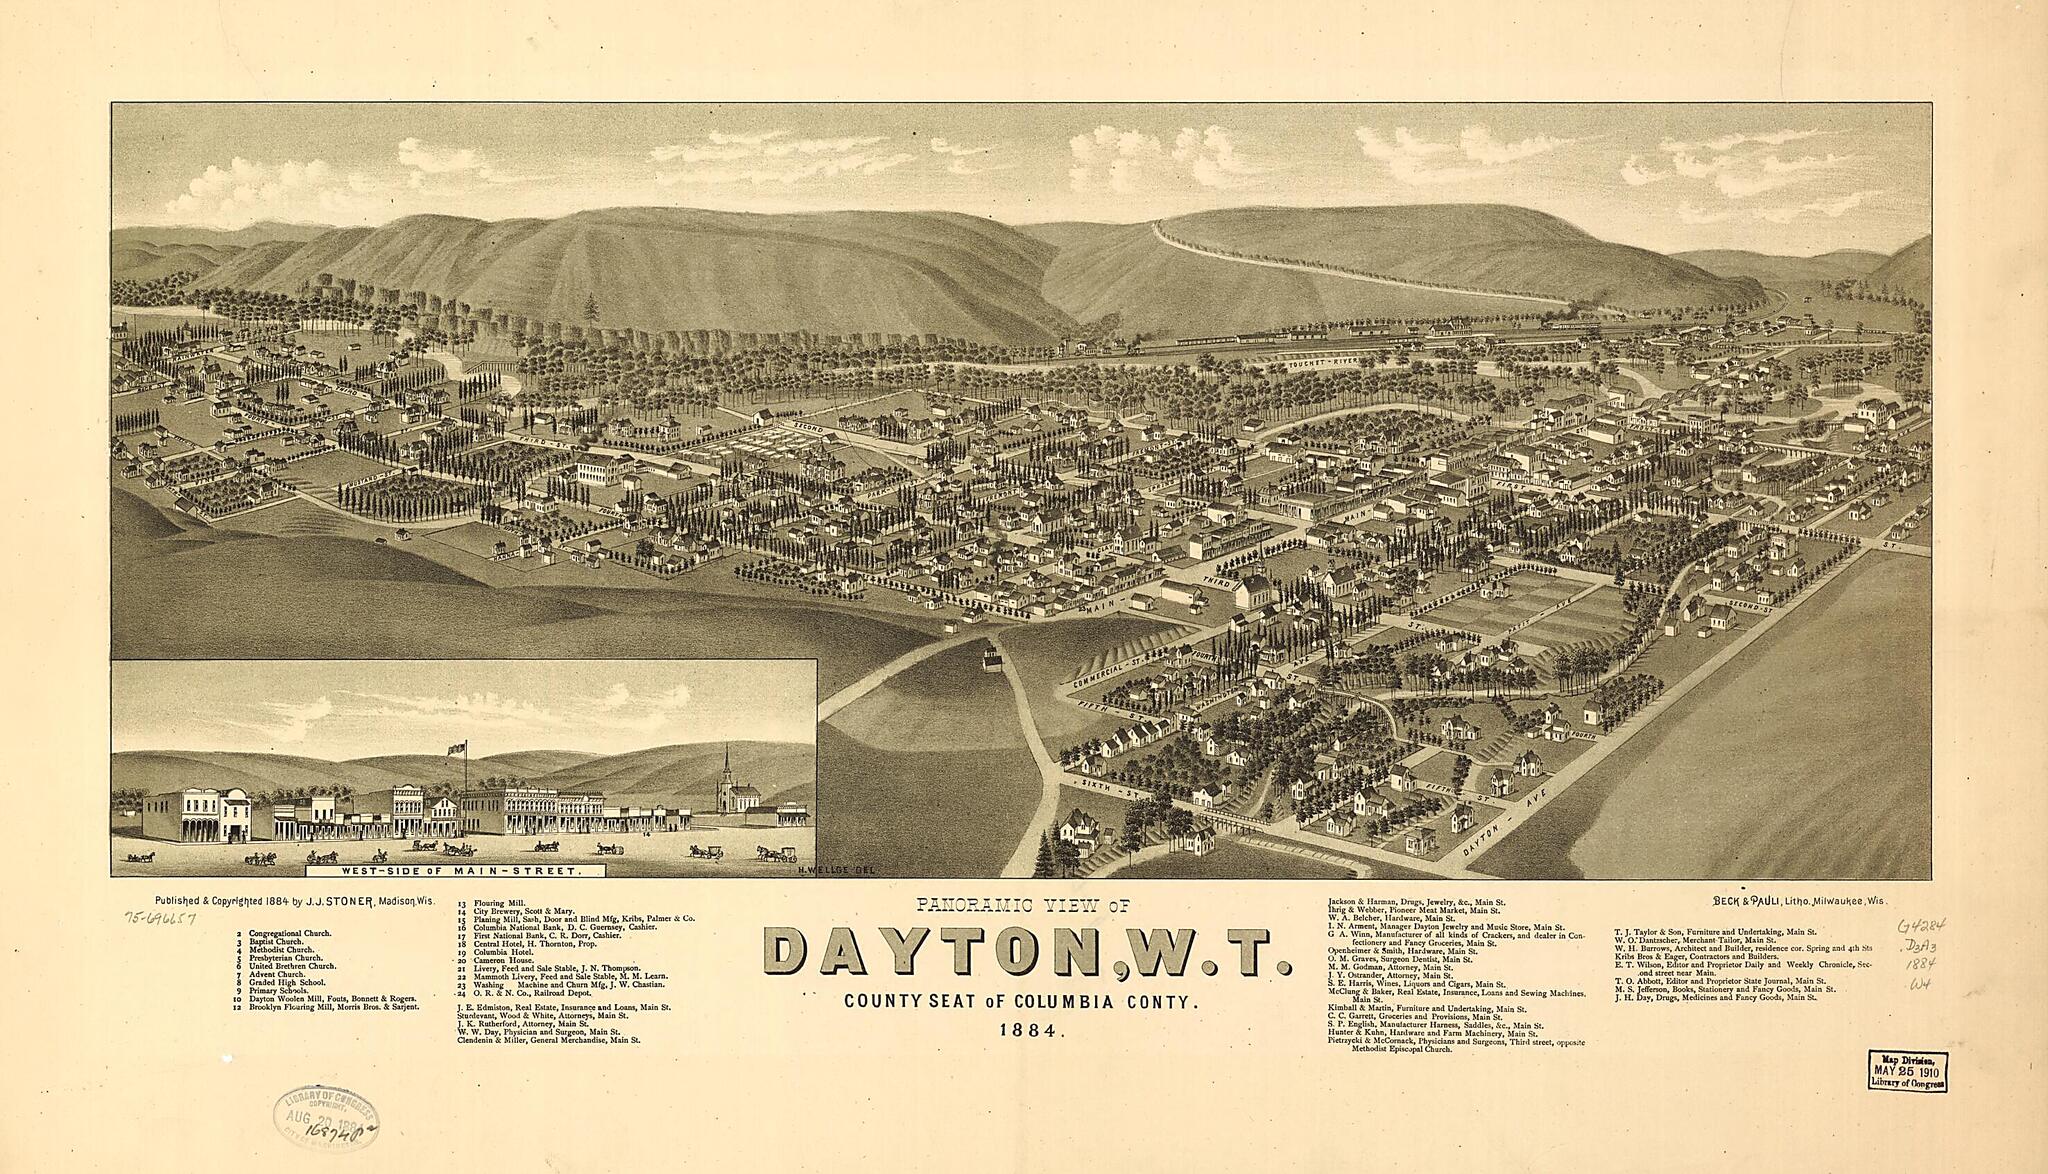 This old map of Panoramic View of Dayton, W.T., County Seat of Columbia County from 1884 was created by  Beck &amp; Pauli, J. J. Stoner, H. (Henry) Wellge in 1884